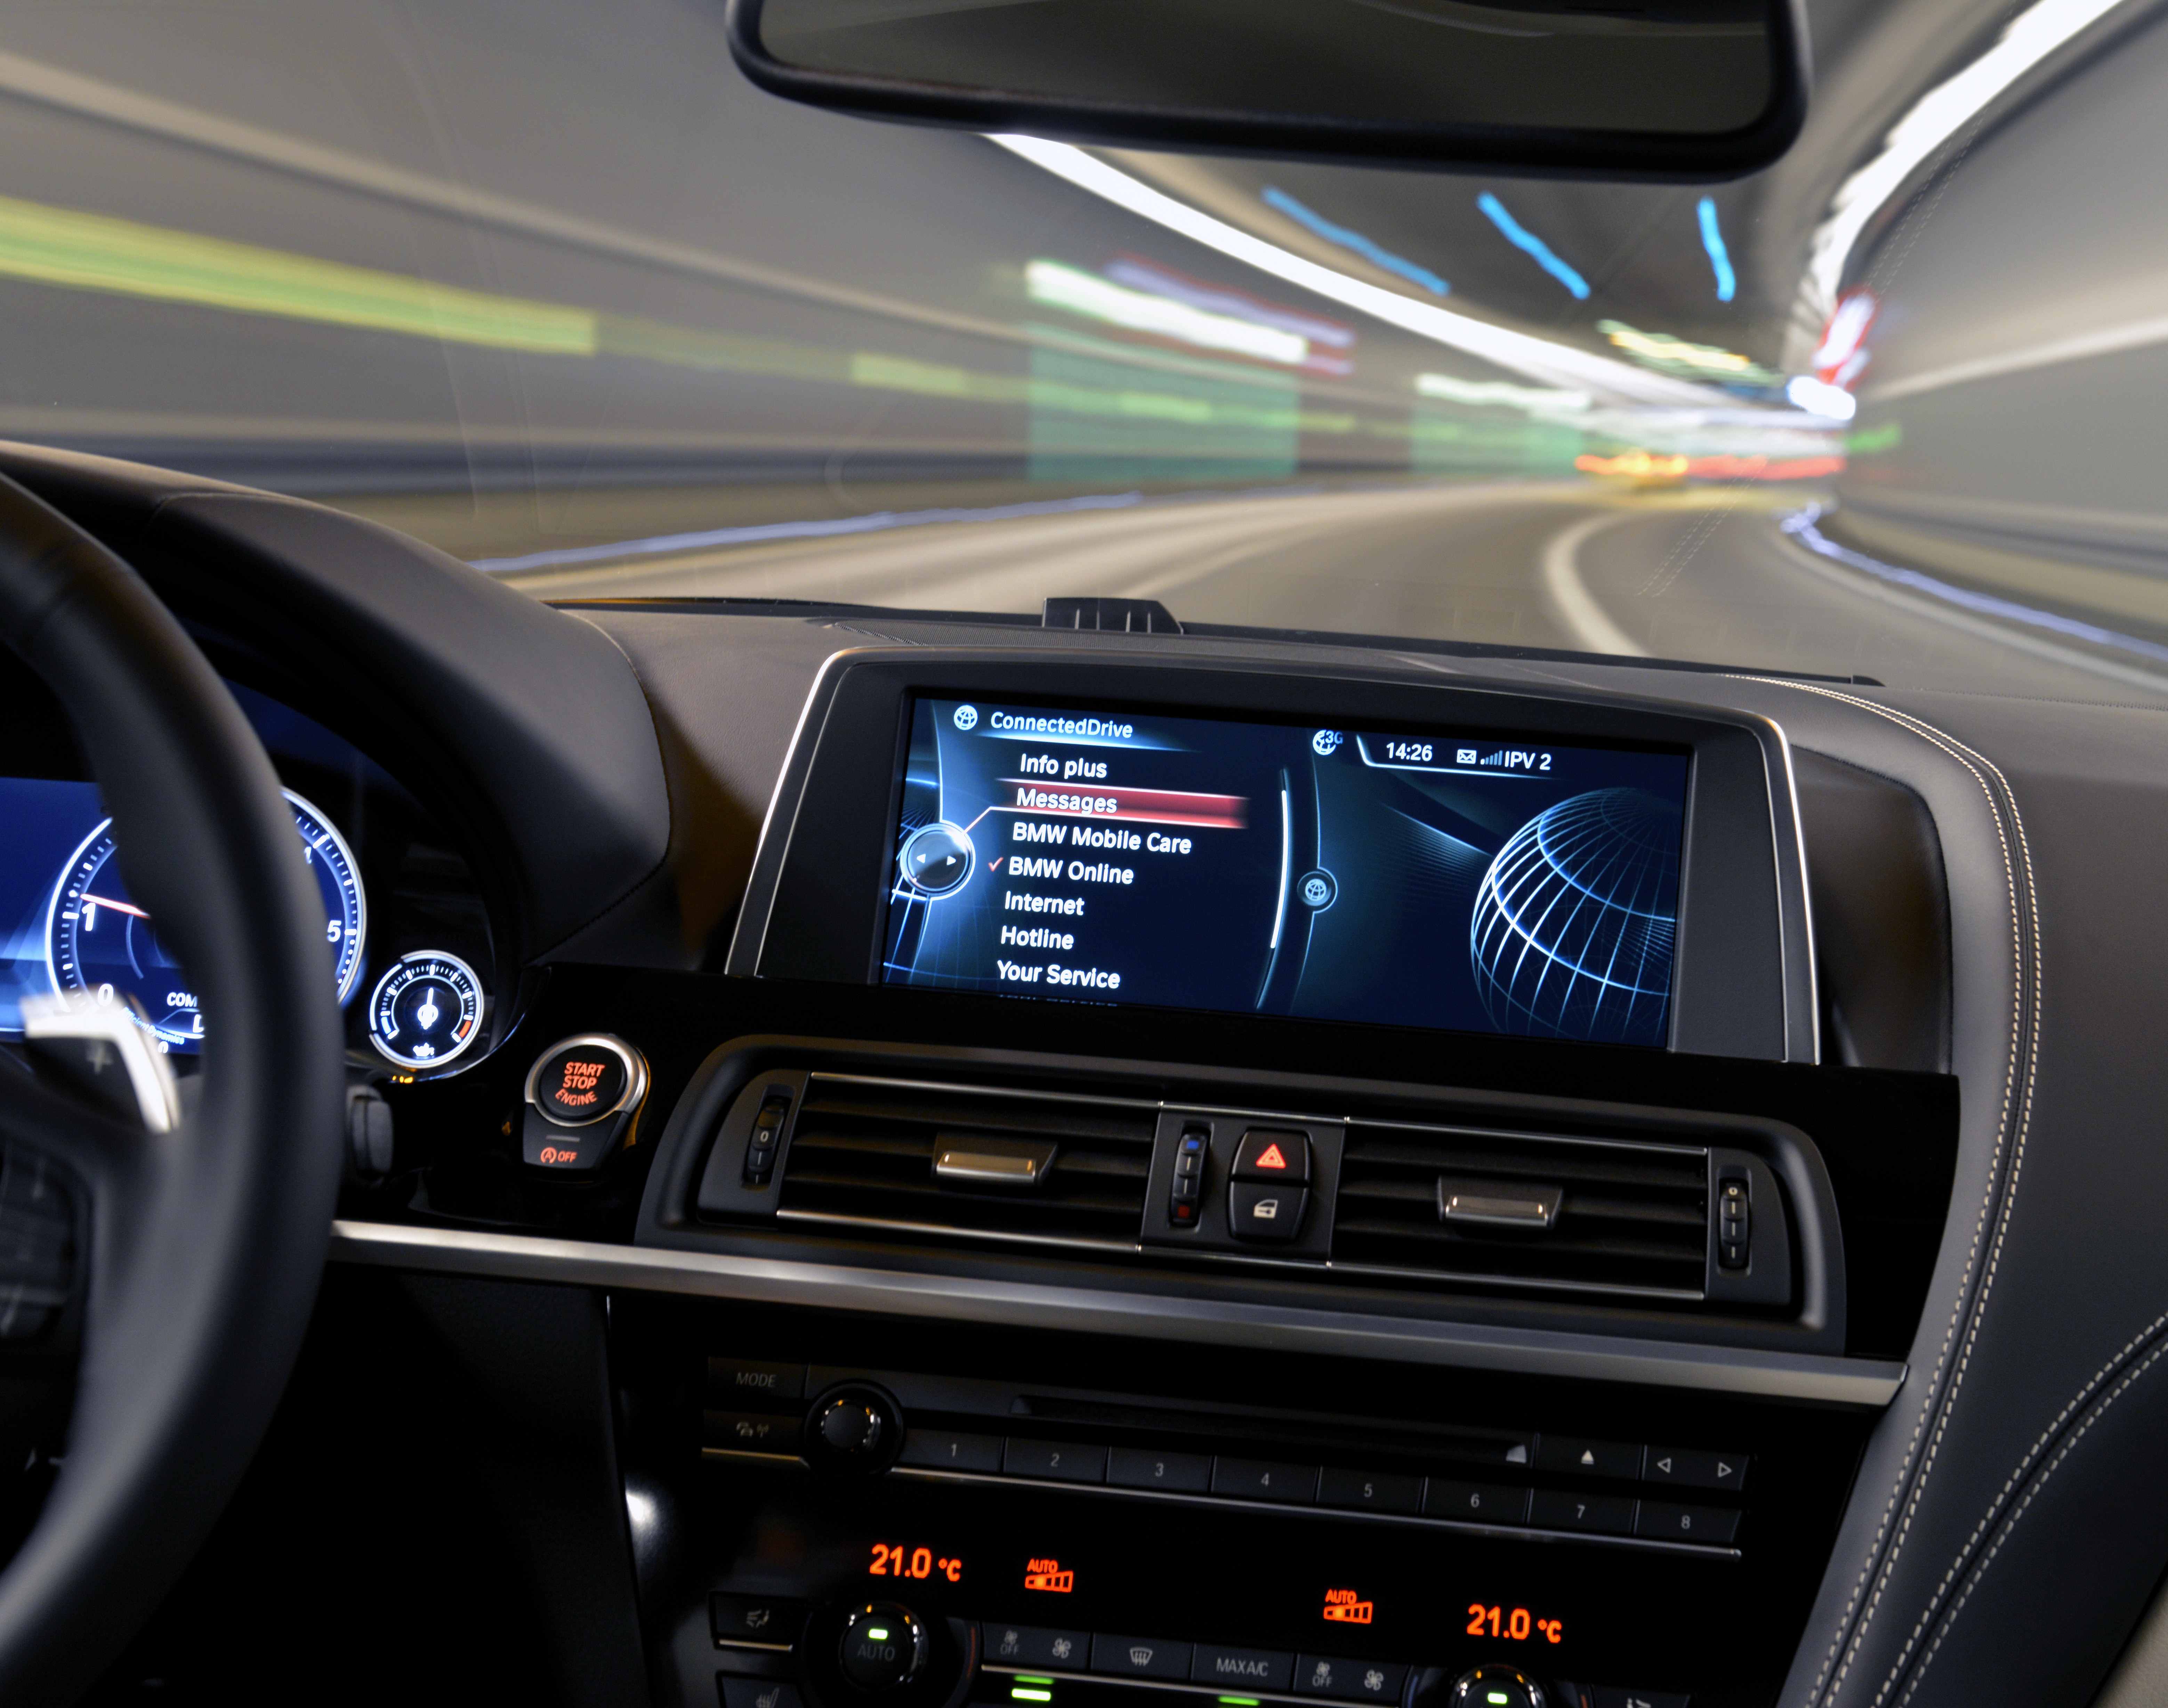 In-Vehicle Apps to Reach 270m by 2018, Predicts Report